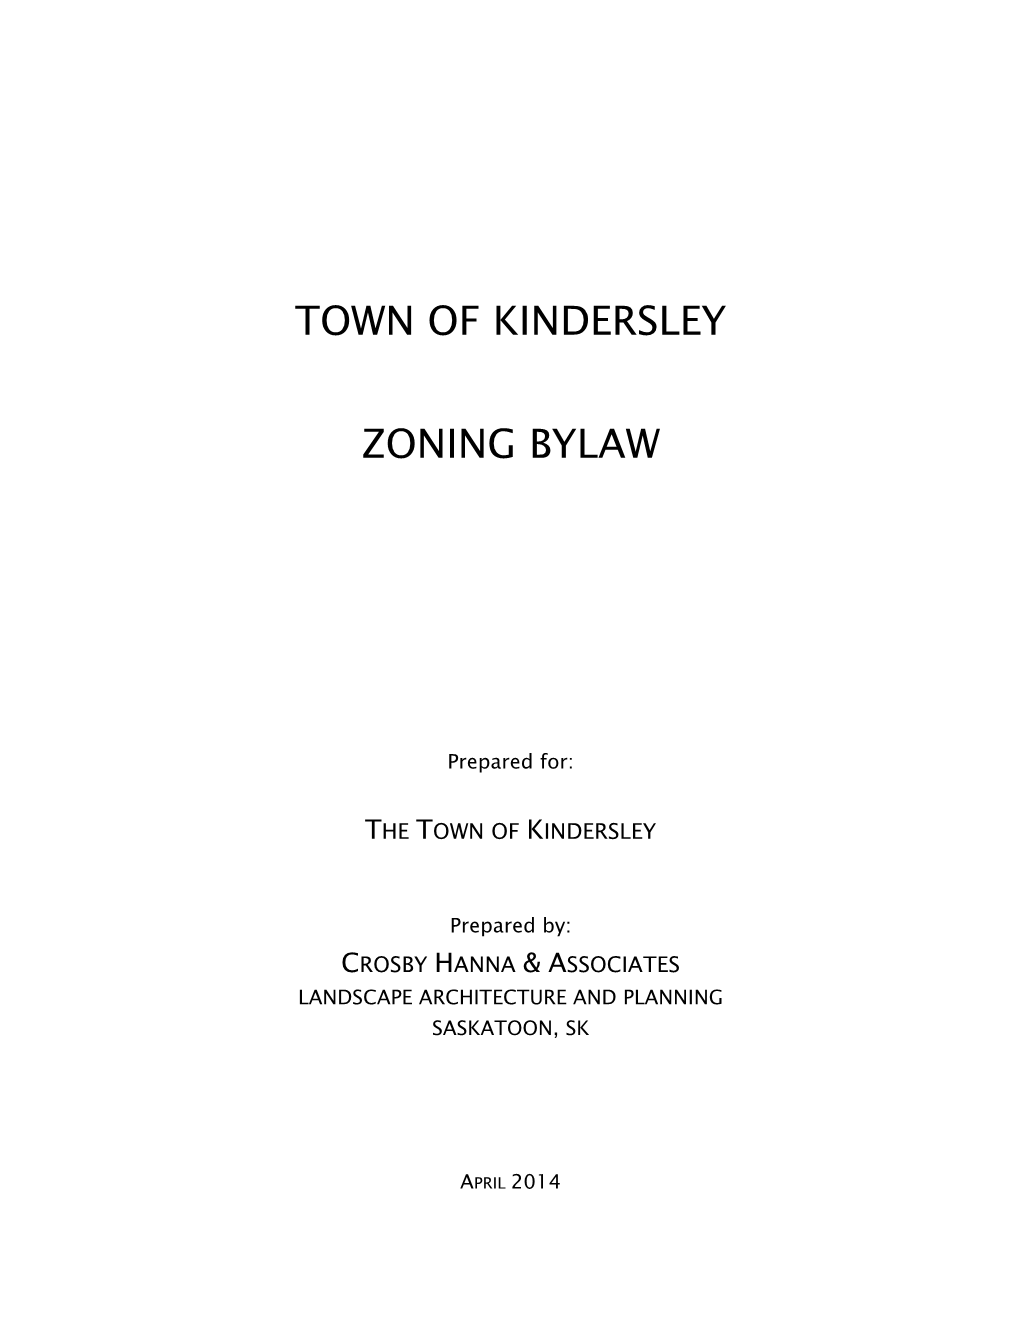 Town of Kindersley Zoning Bylaw